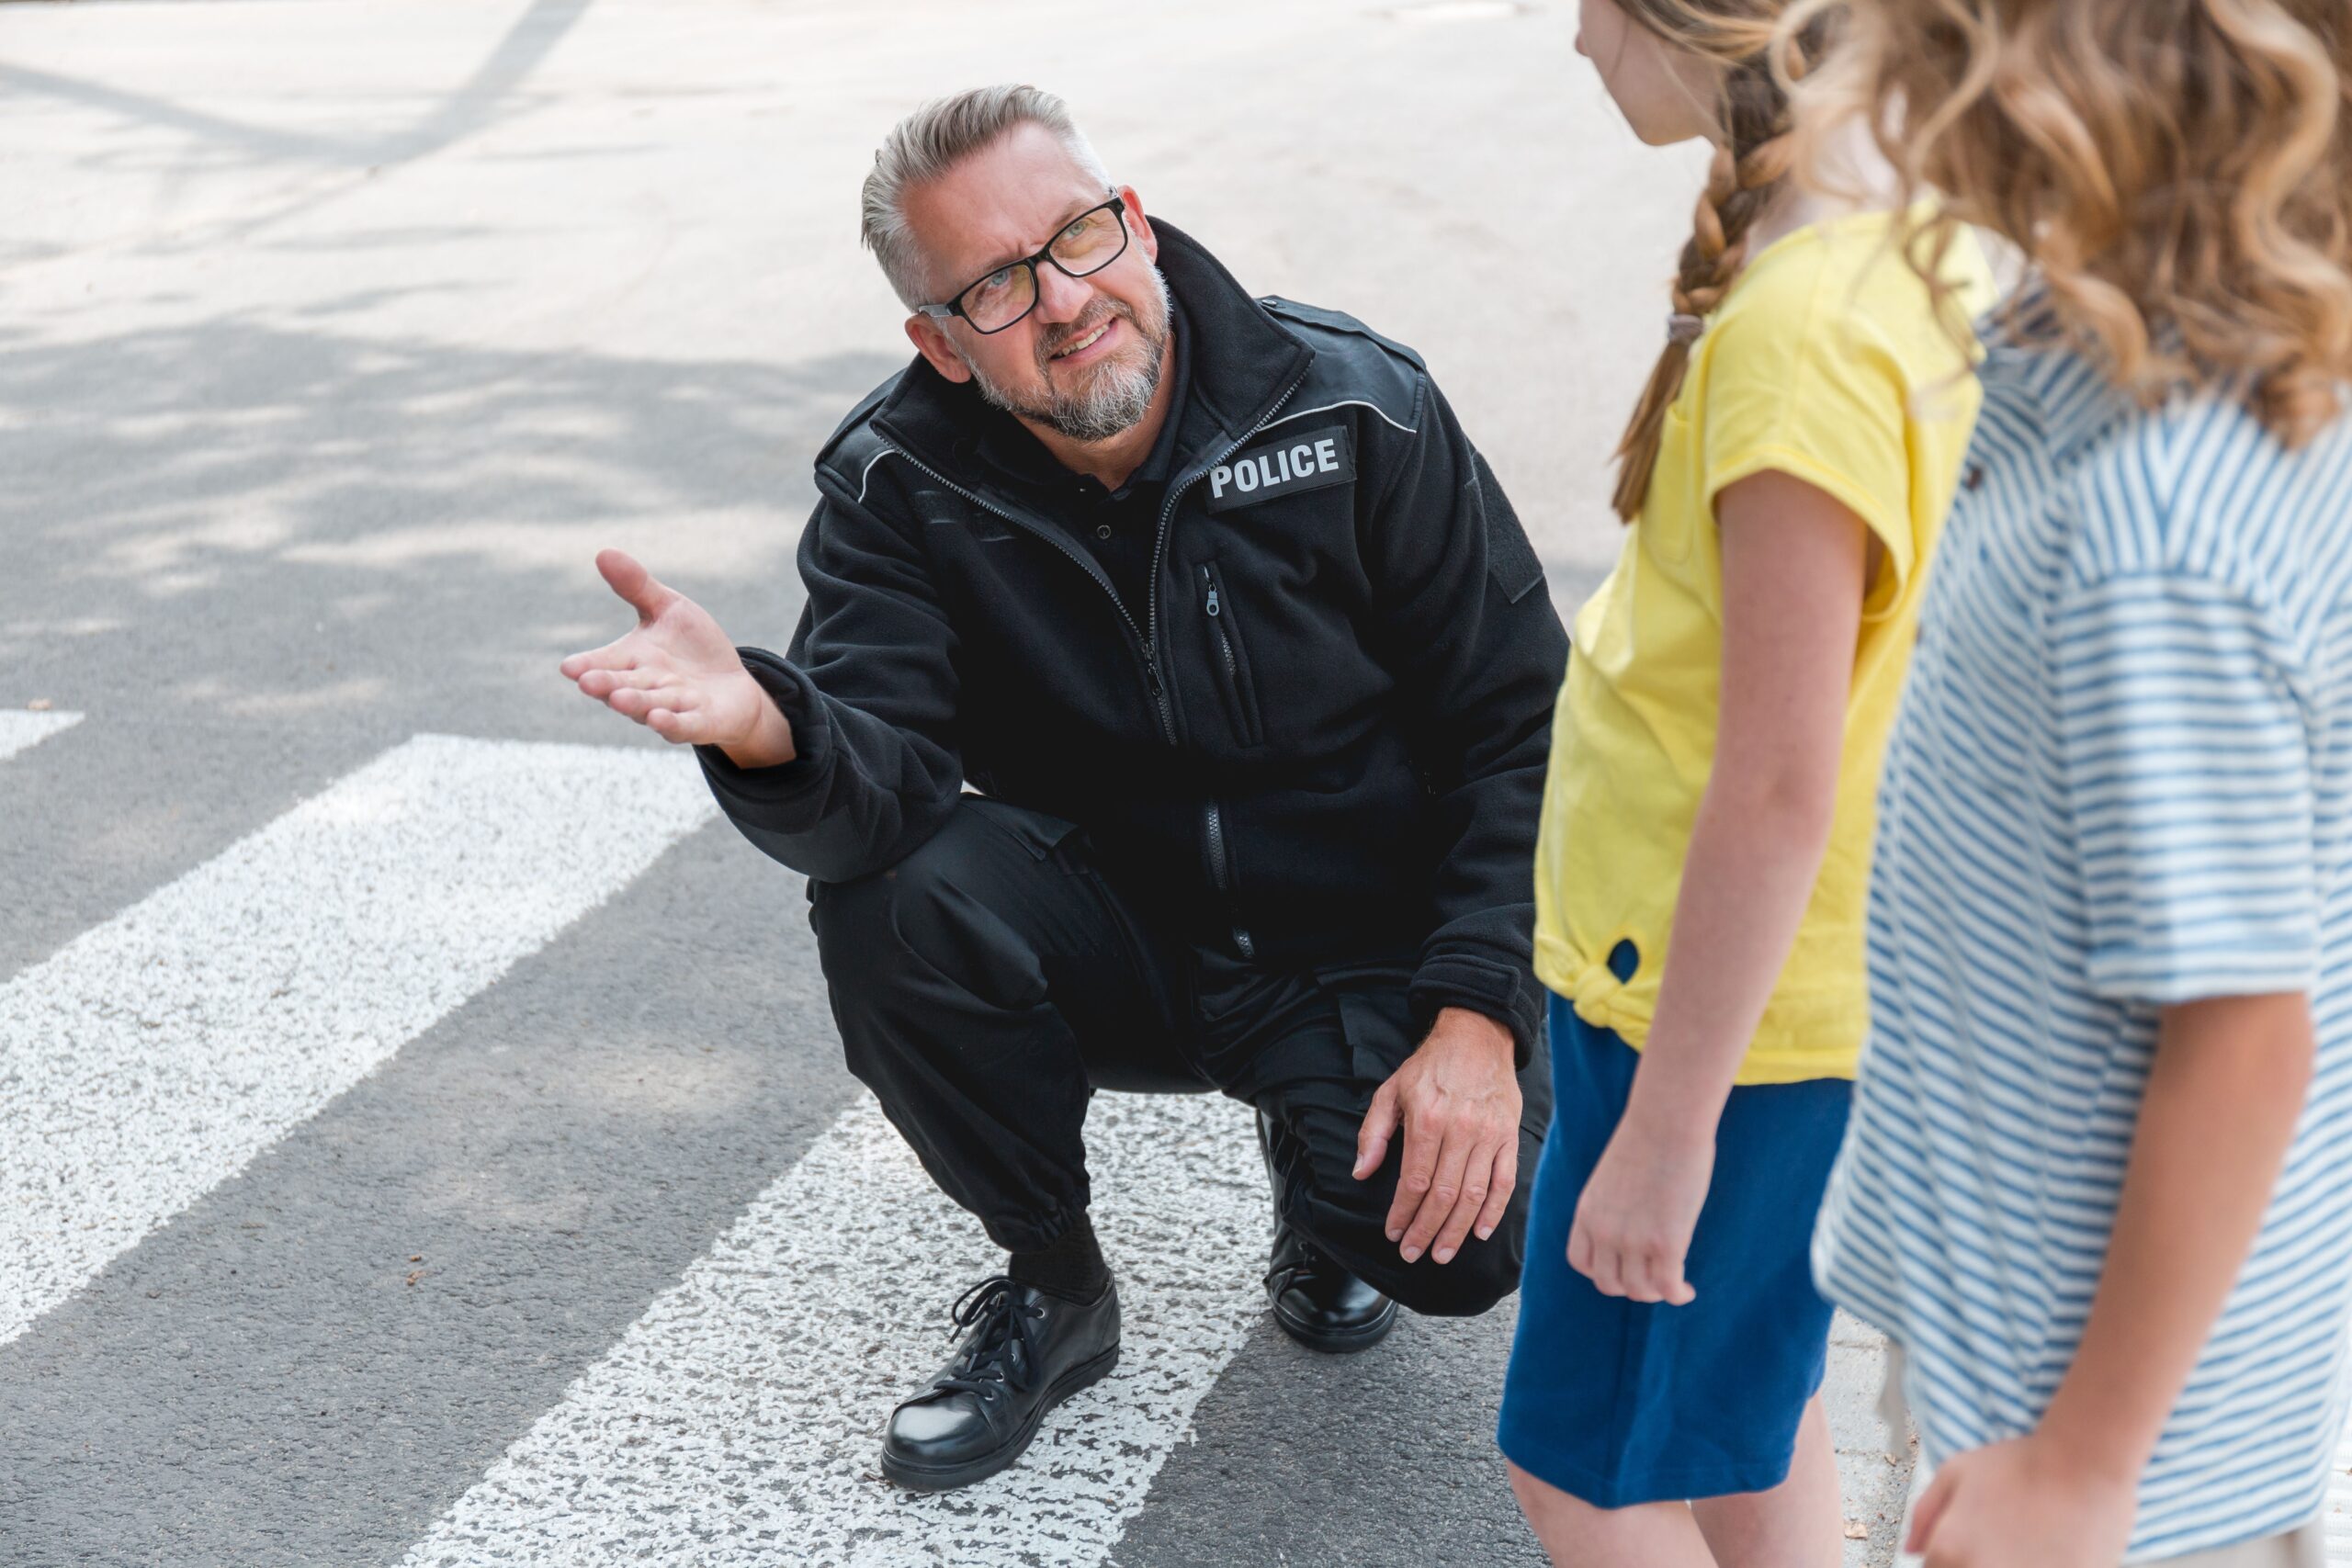 Policeman crouching in front of a pedestrian explains to a group of school children how to cross the street